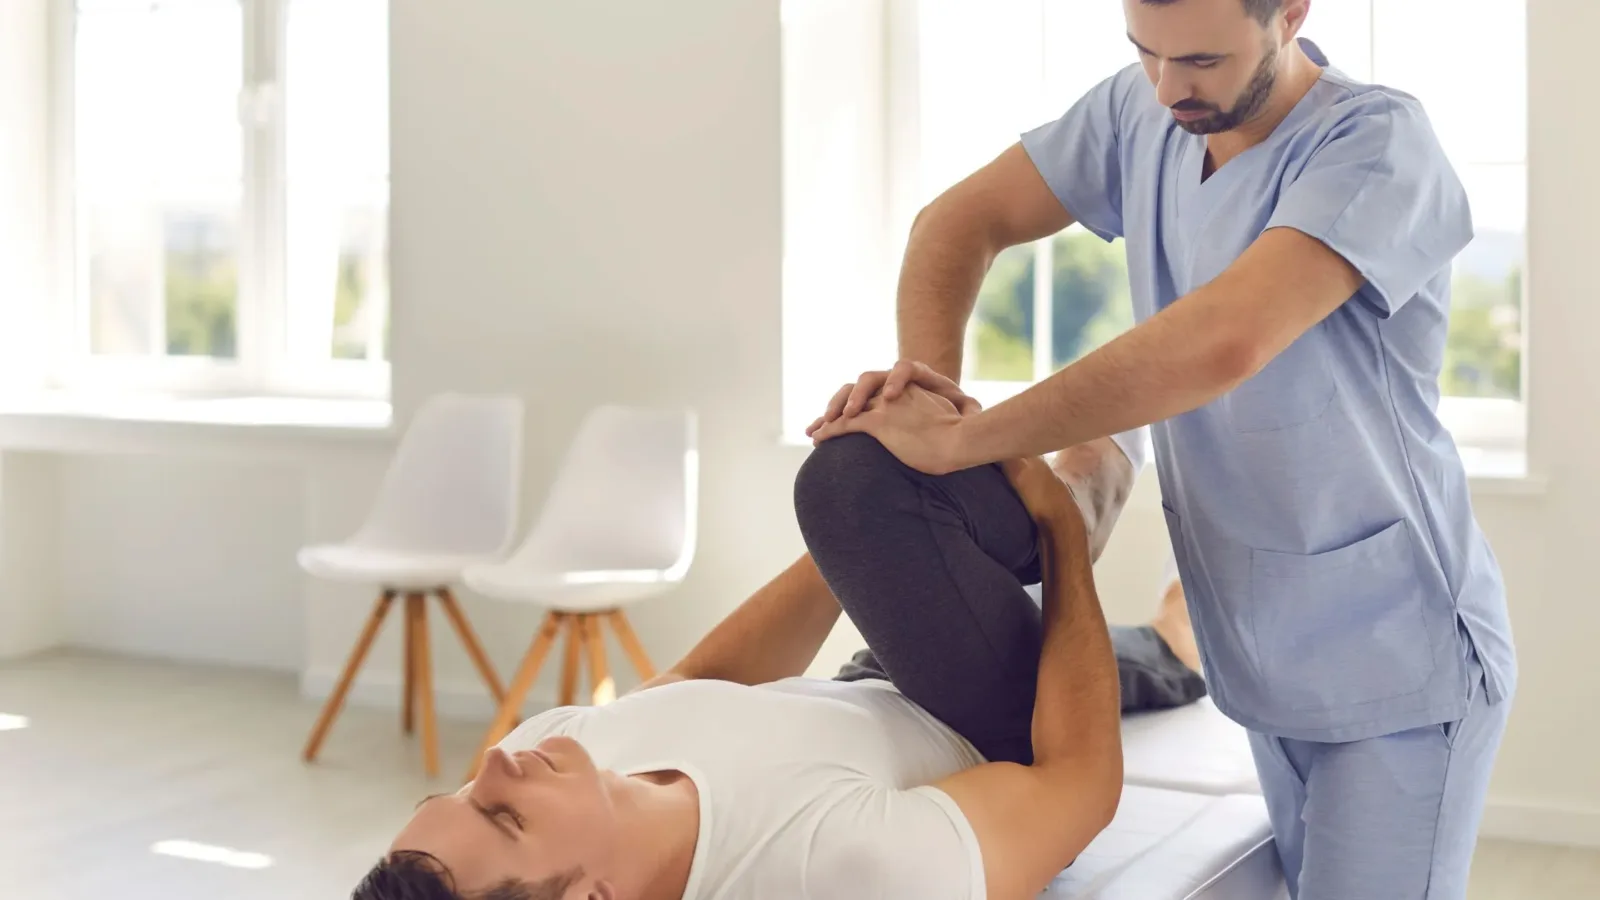 Physical Therapy Should Be Your Secret Weapon Before Surgery